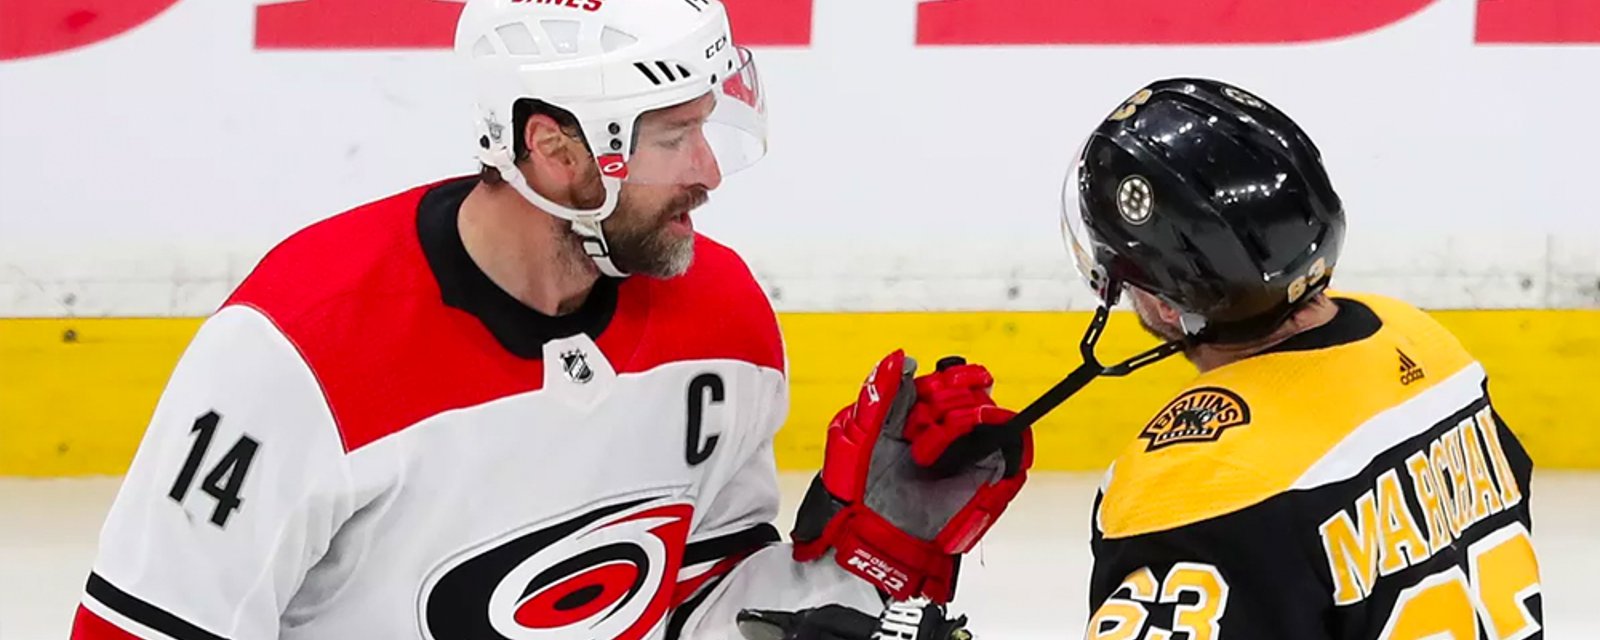 Bruins eliminate Hurricanes, Justin Williams plays his final NHL game